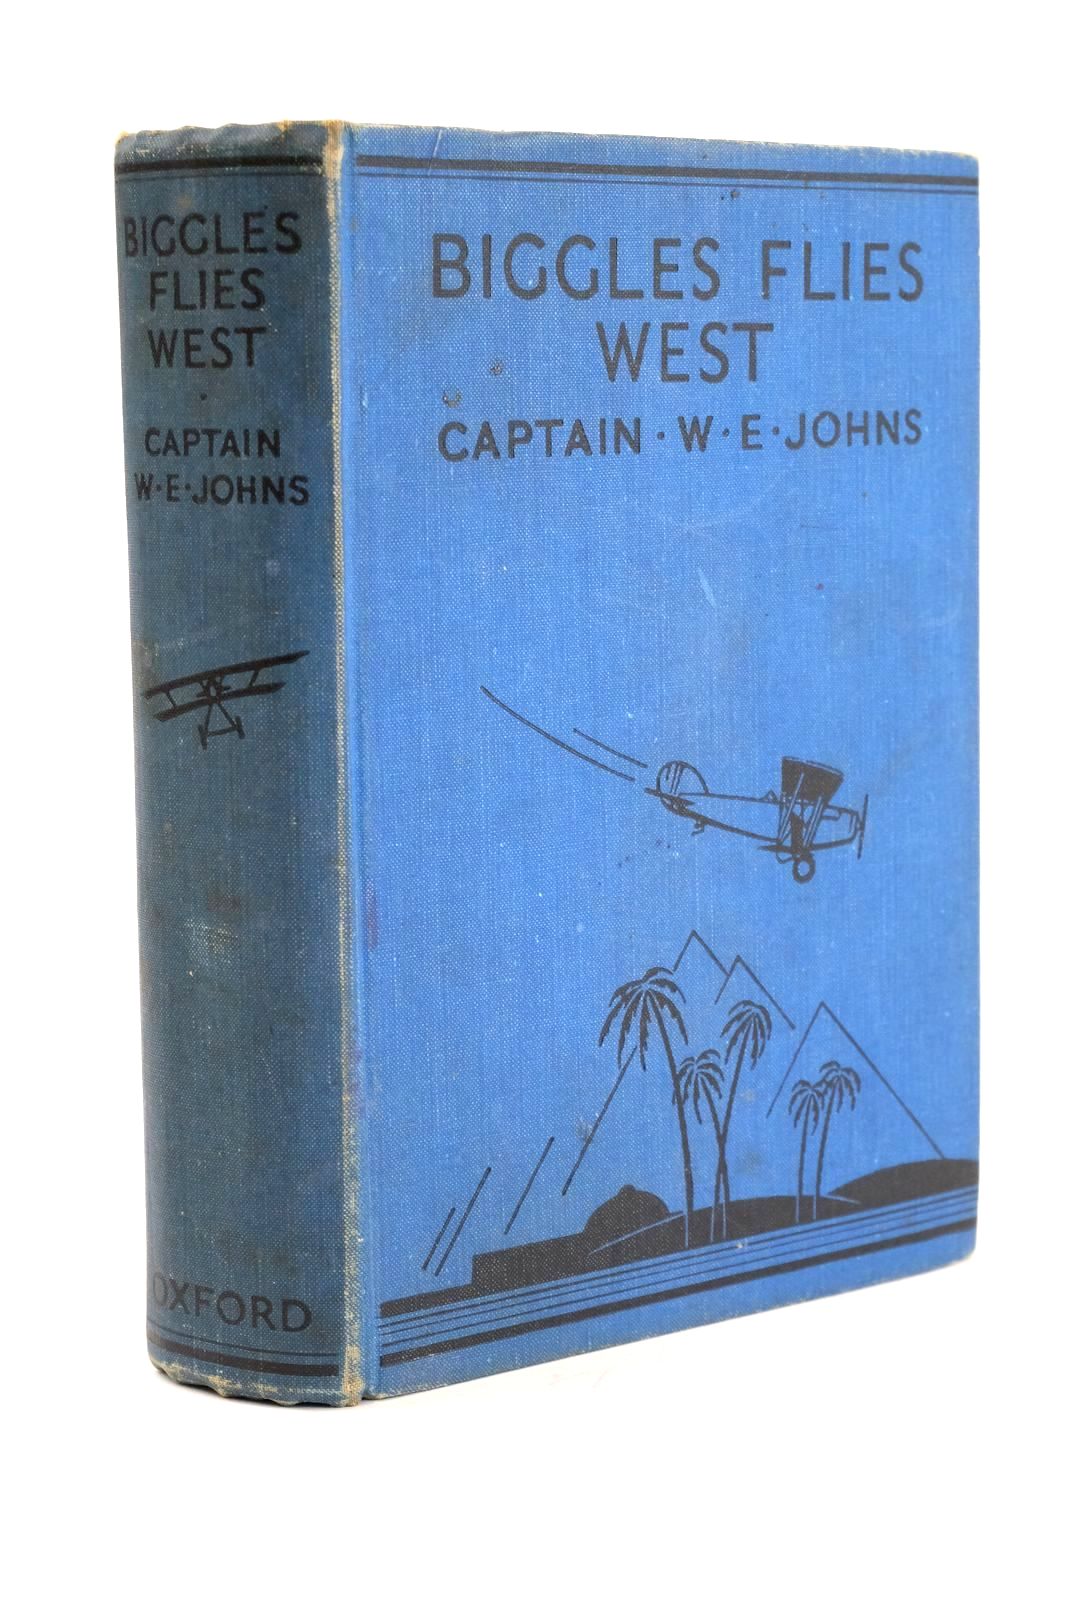 Photo of BIGGLES FLIES WEST written by Johns, W.E. illustrated by Leigh, Howard Sindall, Alfred published by Oxford University Press, Humphrey Milford (STOCK CODE: 1324032)  for sale by Stella & Rose's Books